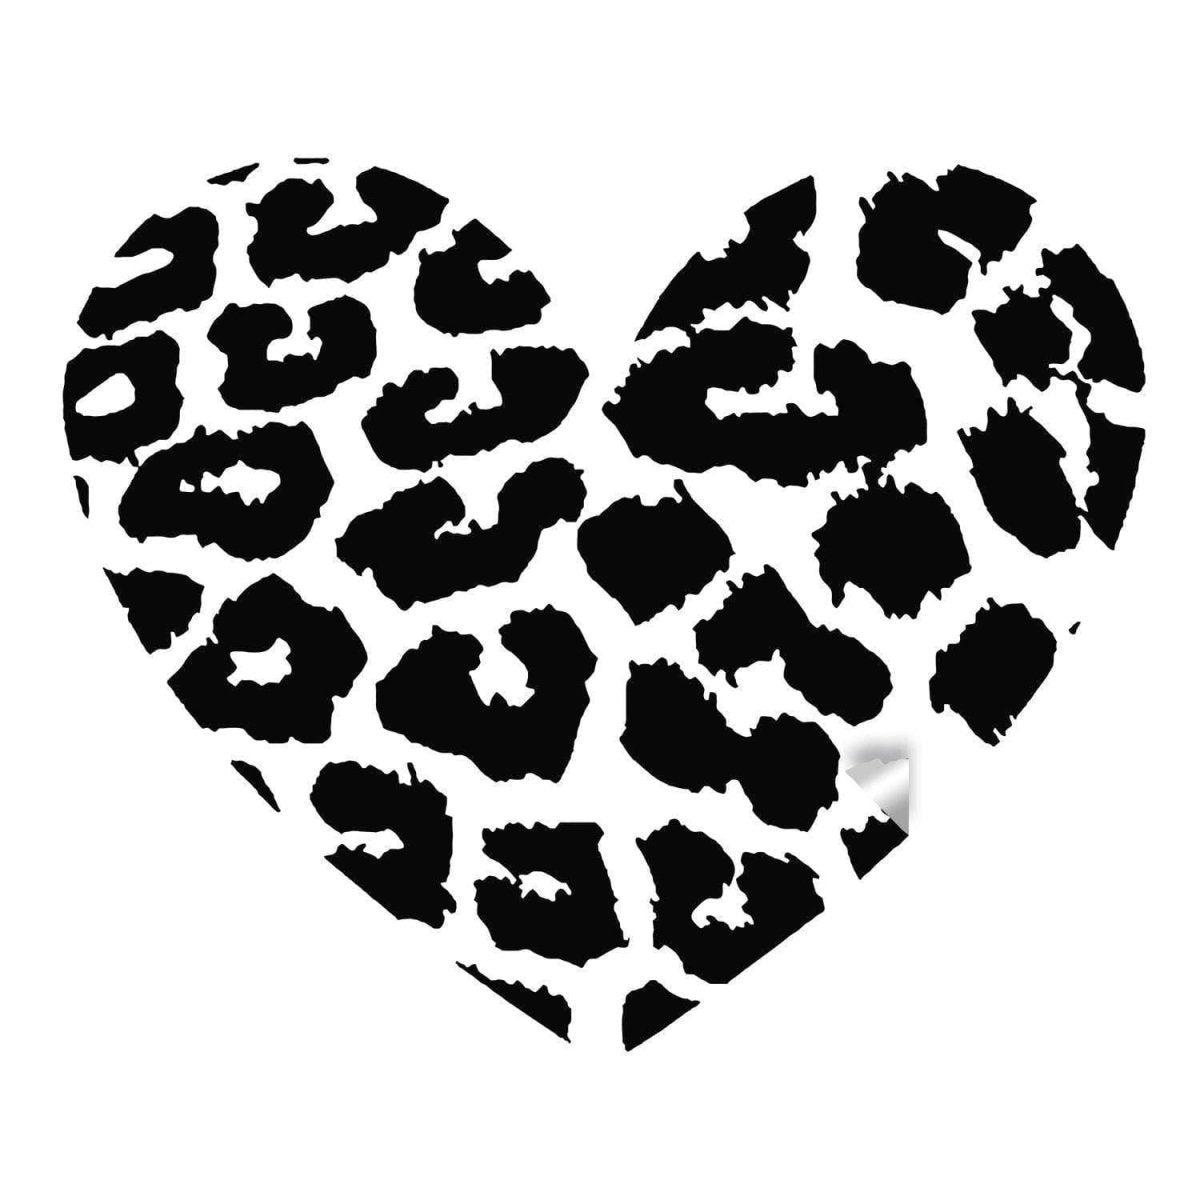 Leopard Heart Vinyl Wall Decal - Exquisite Wildlife Art for Your Space - Decords